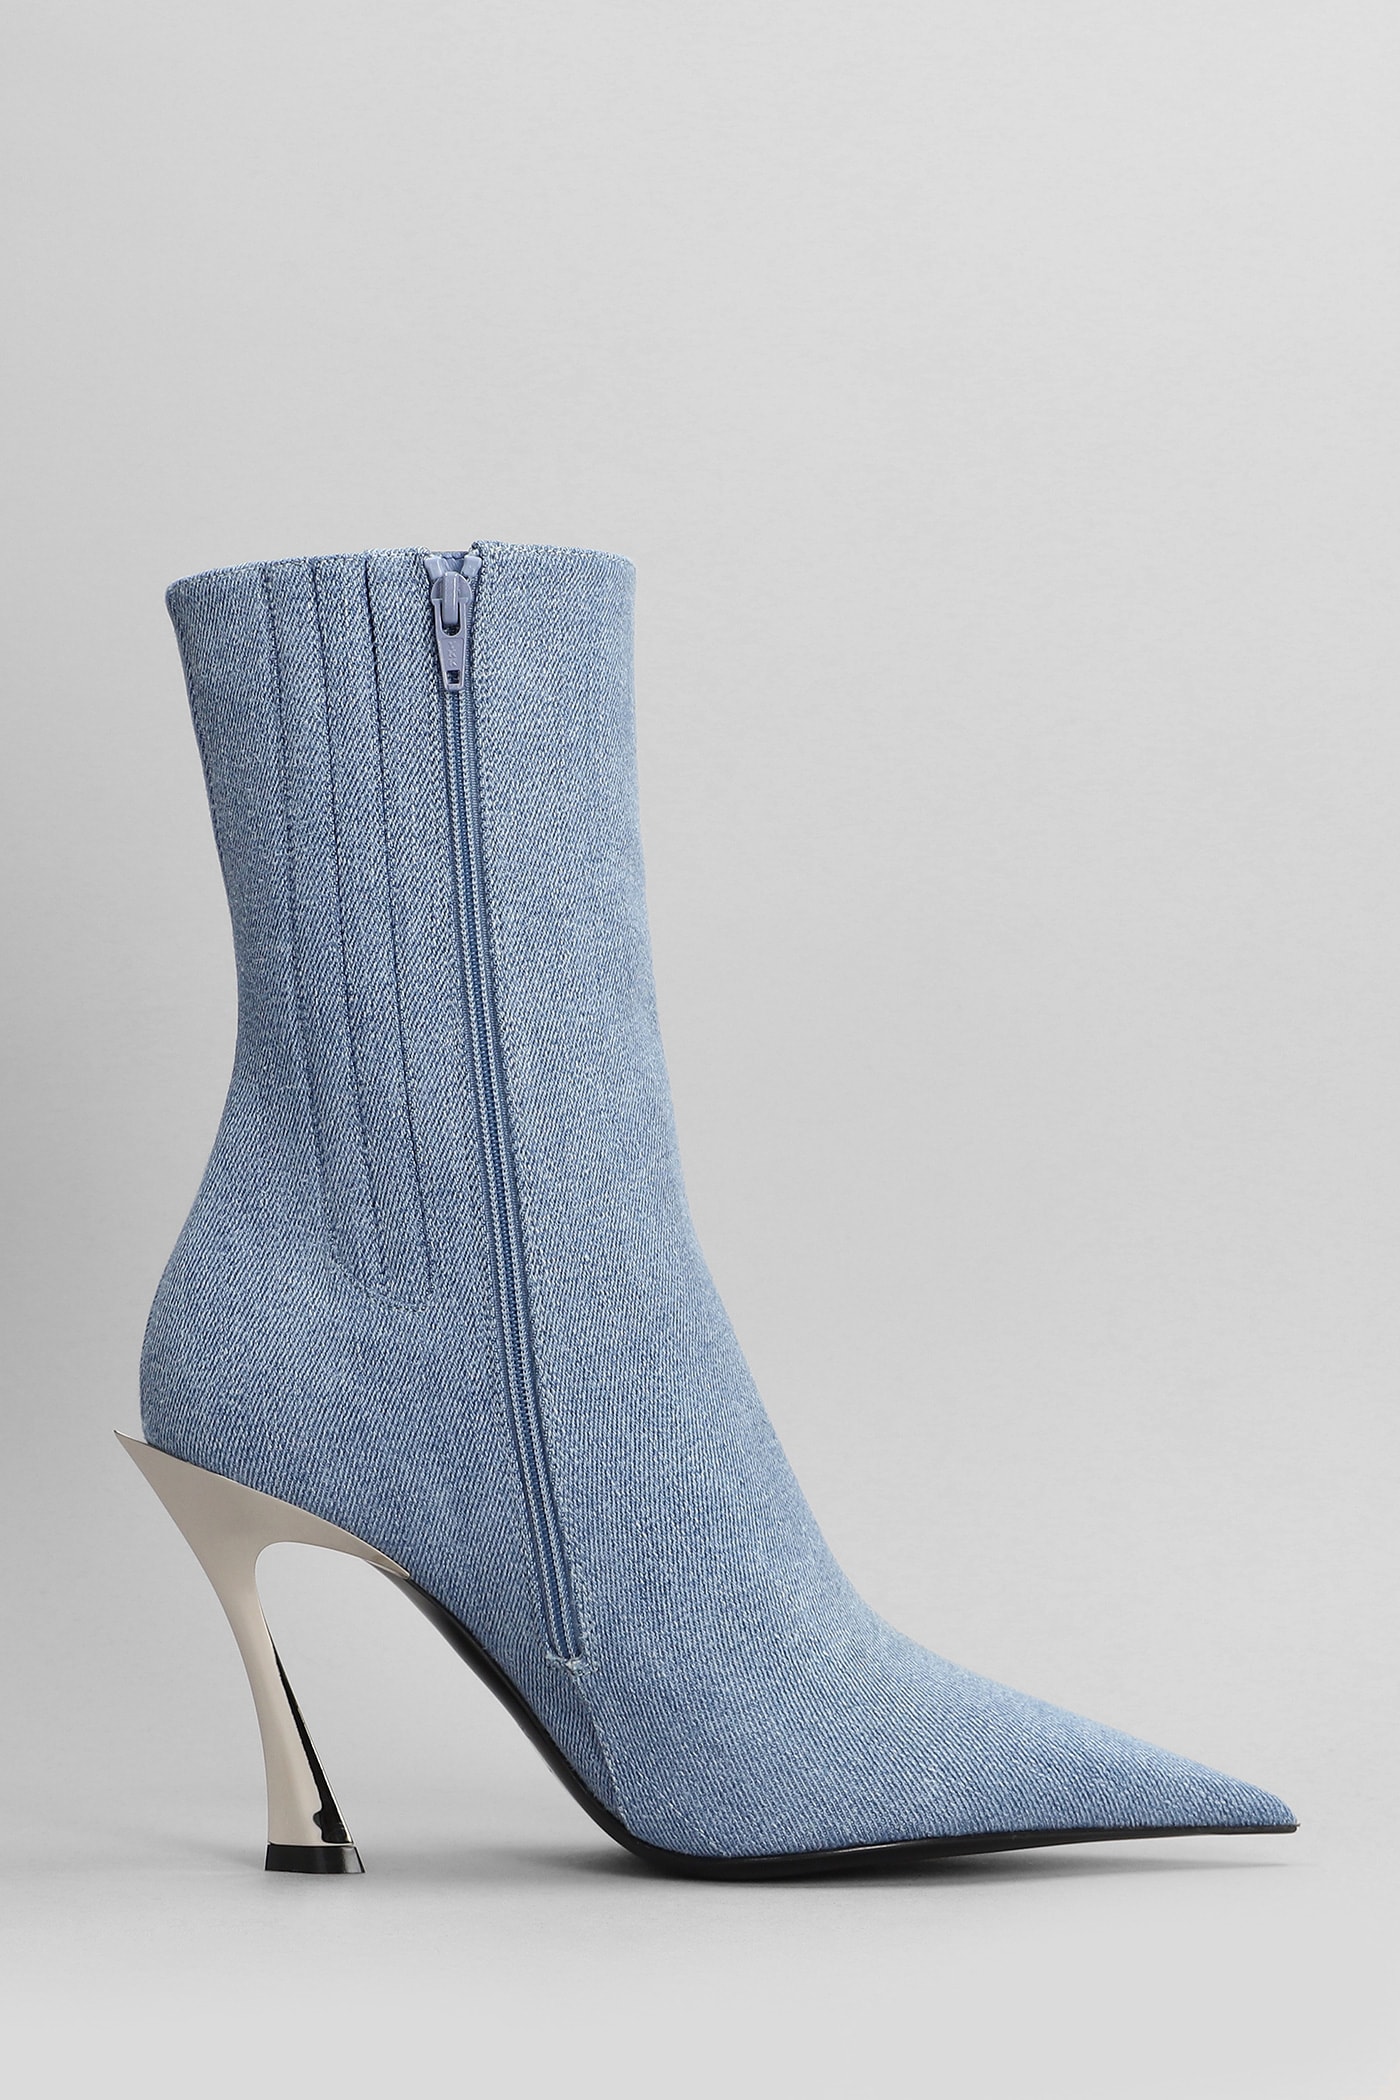 High Heels Ankle Boots In Blue Cotton